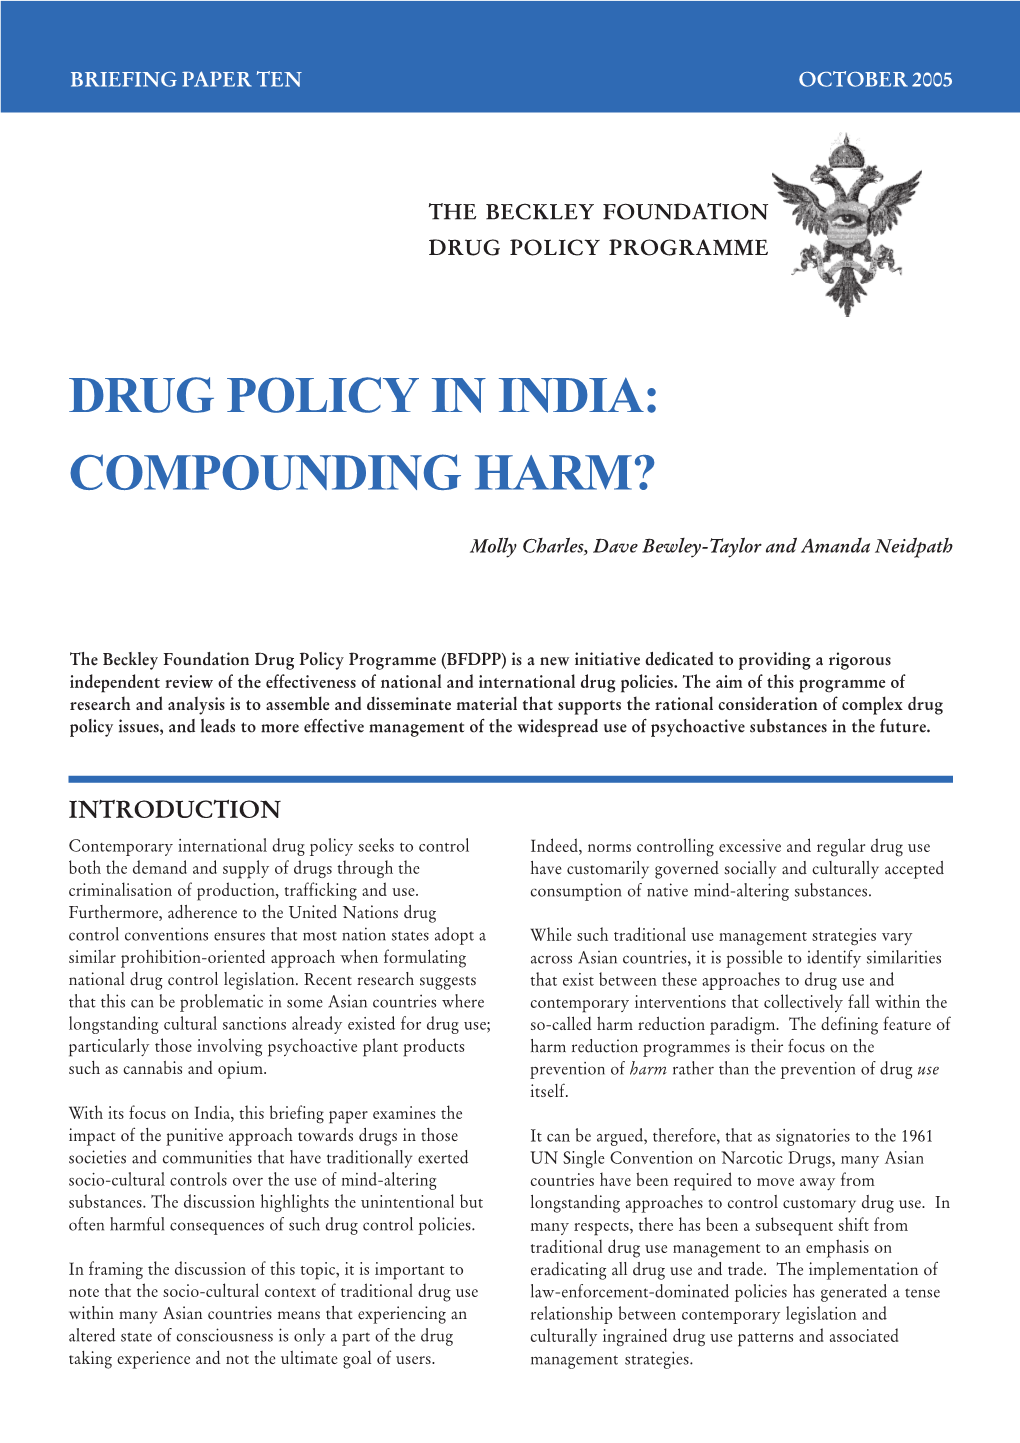 Drug Policy Programme